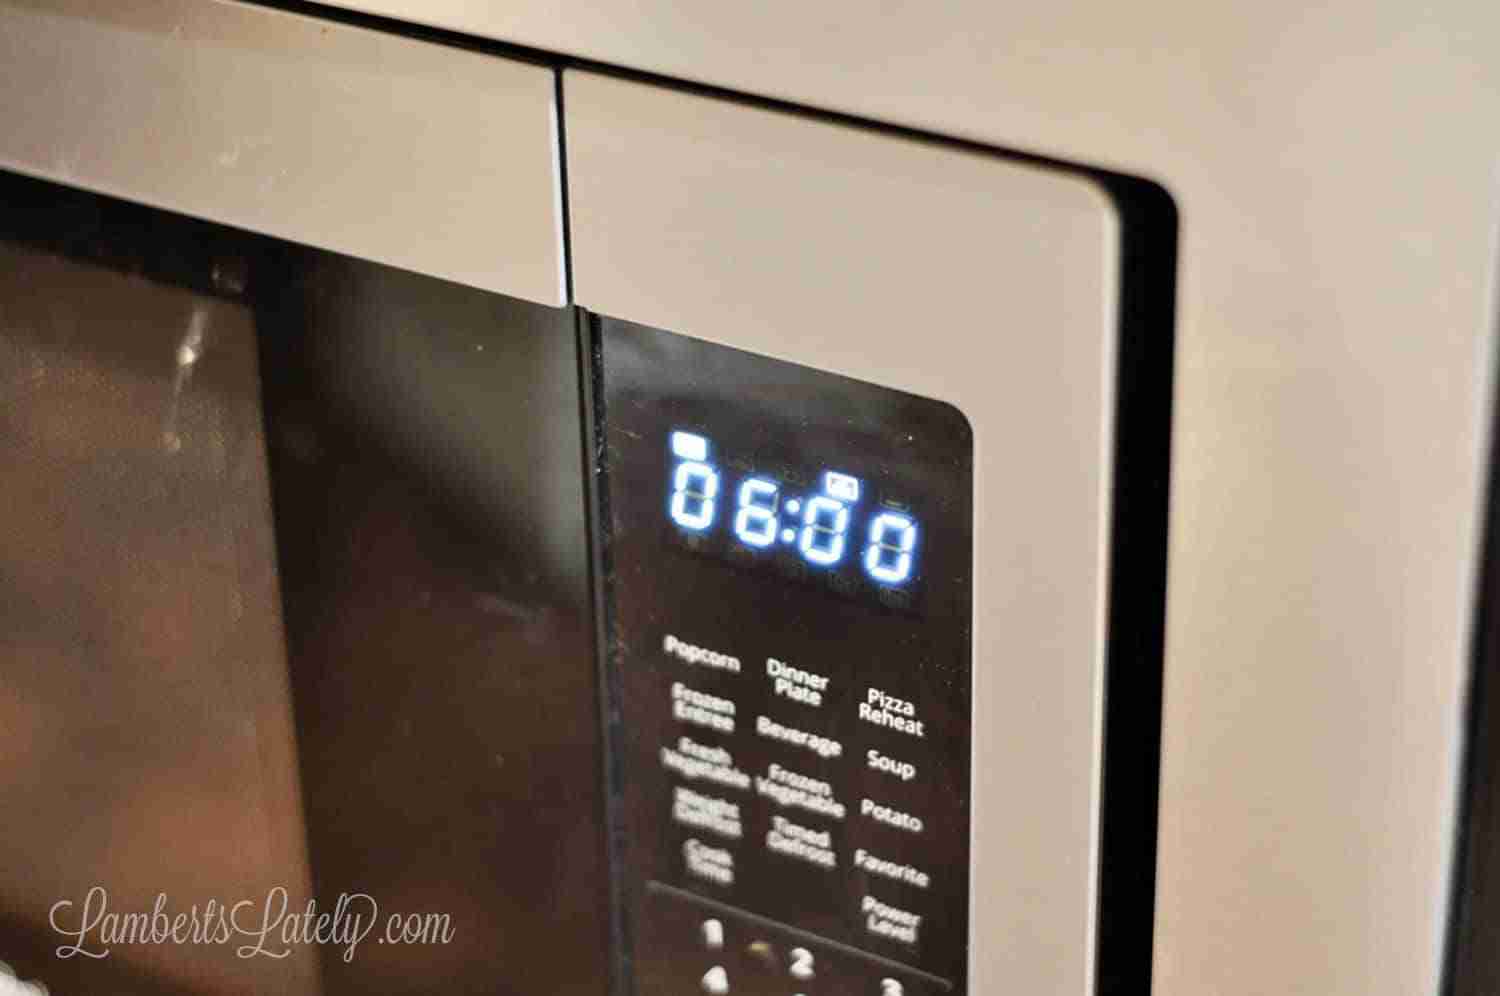 This posts shows how to clean a microwave the easy way - simply use vinegar and water! 